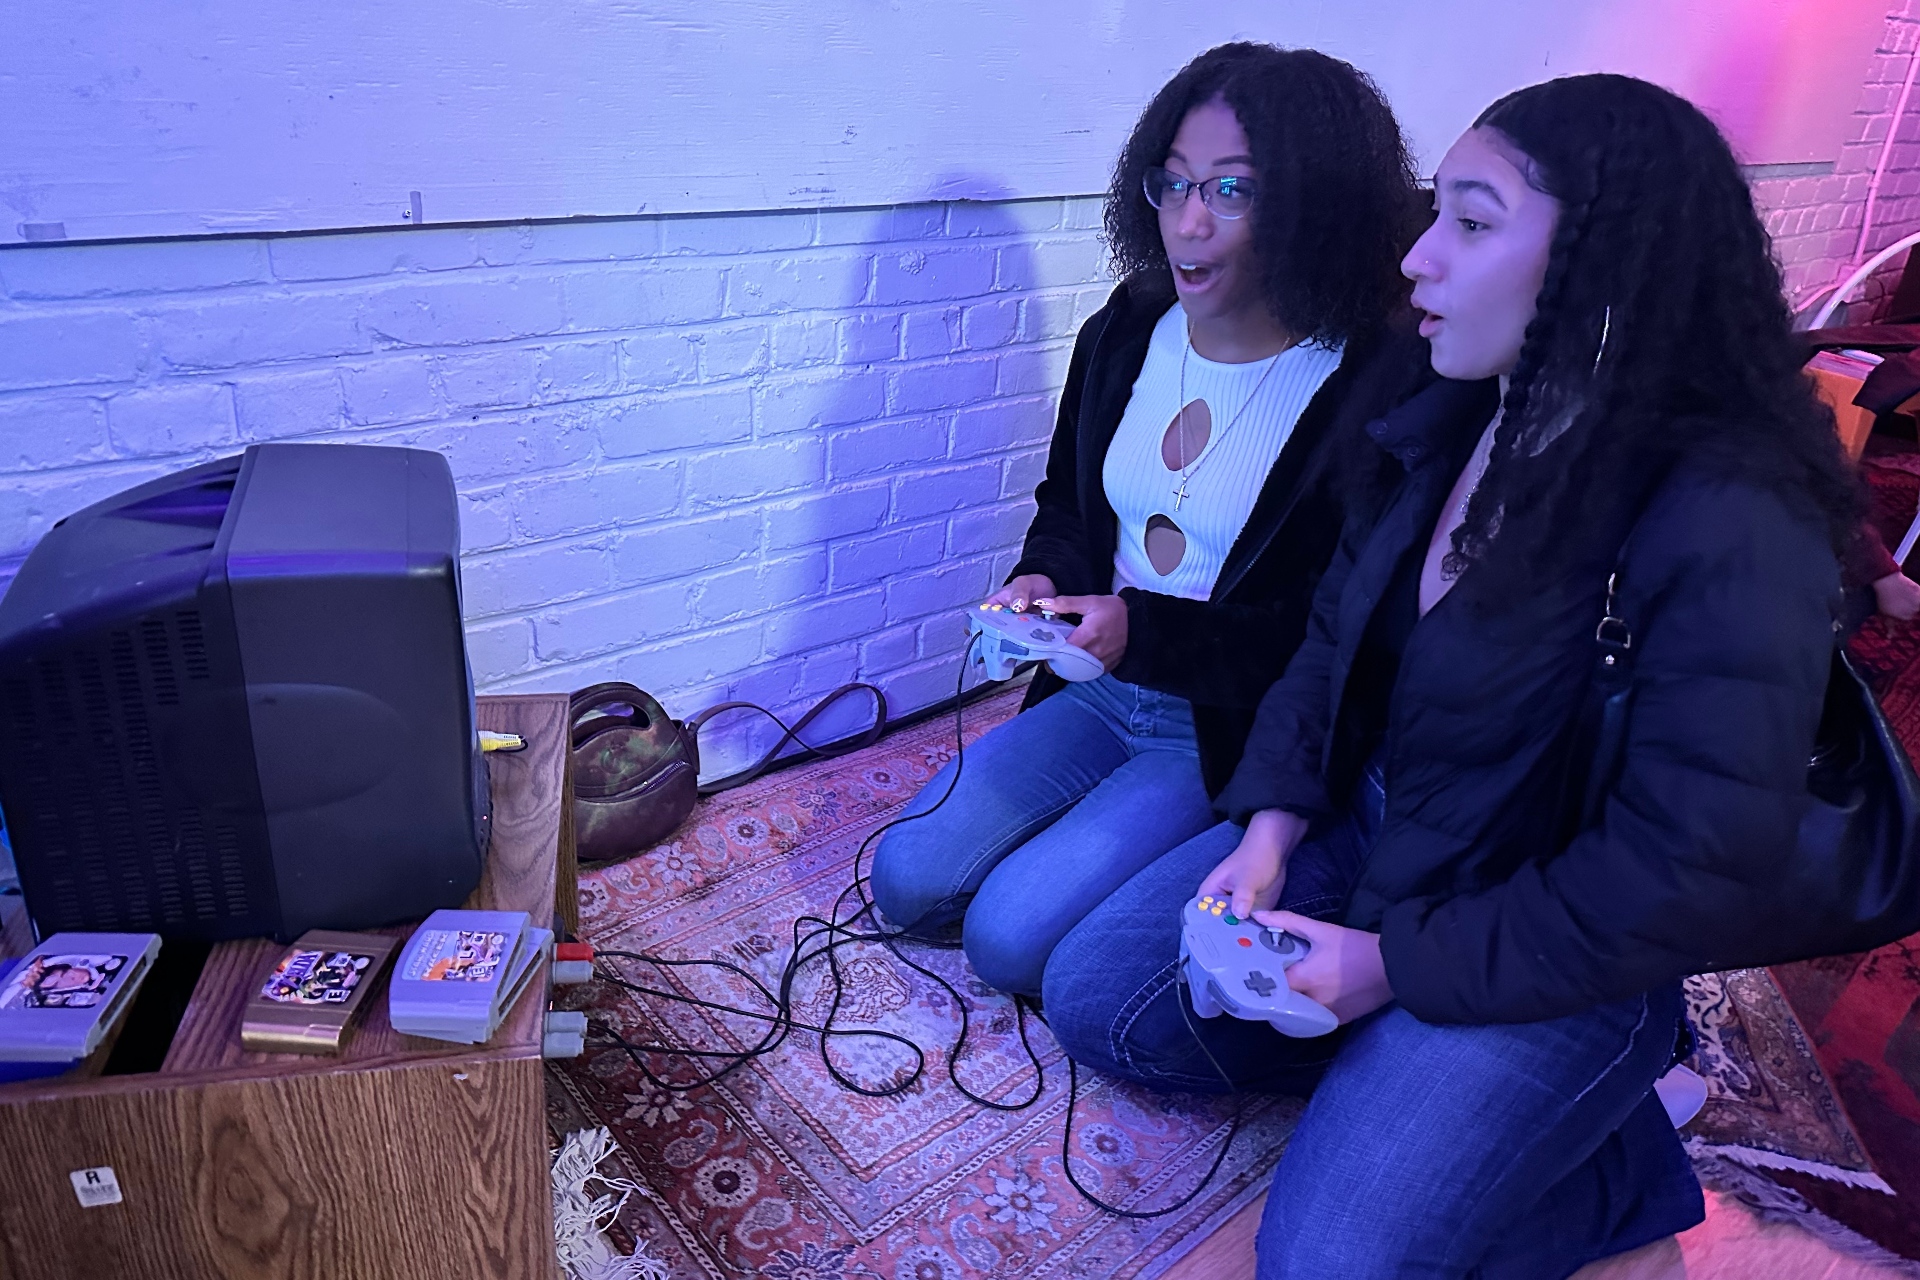 Two people kneel in front of a small TV screen while holding video game controllers.